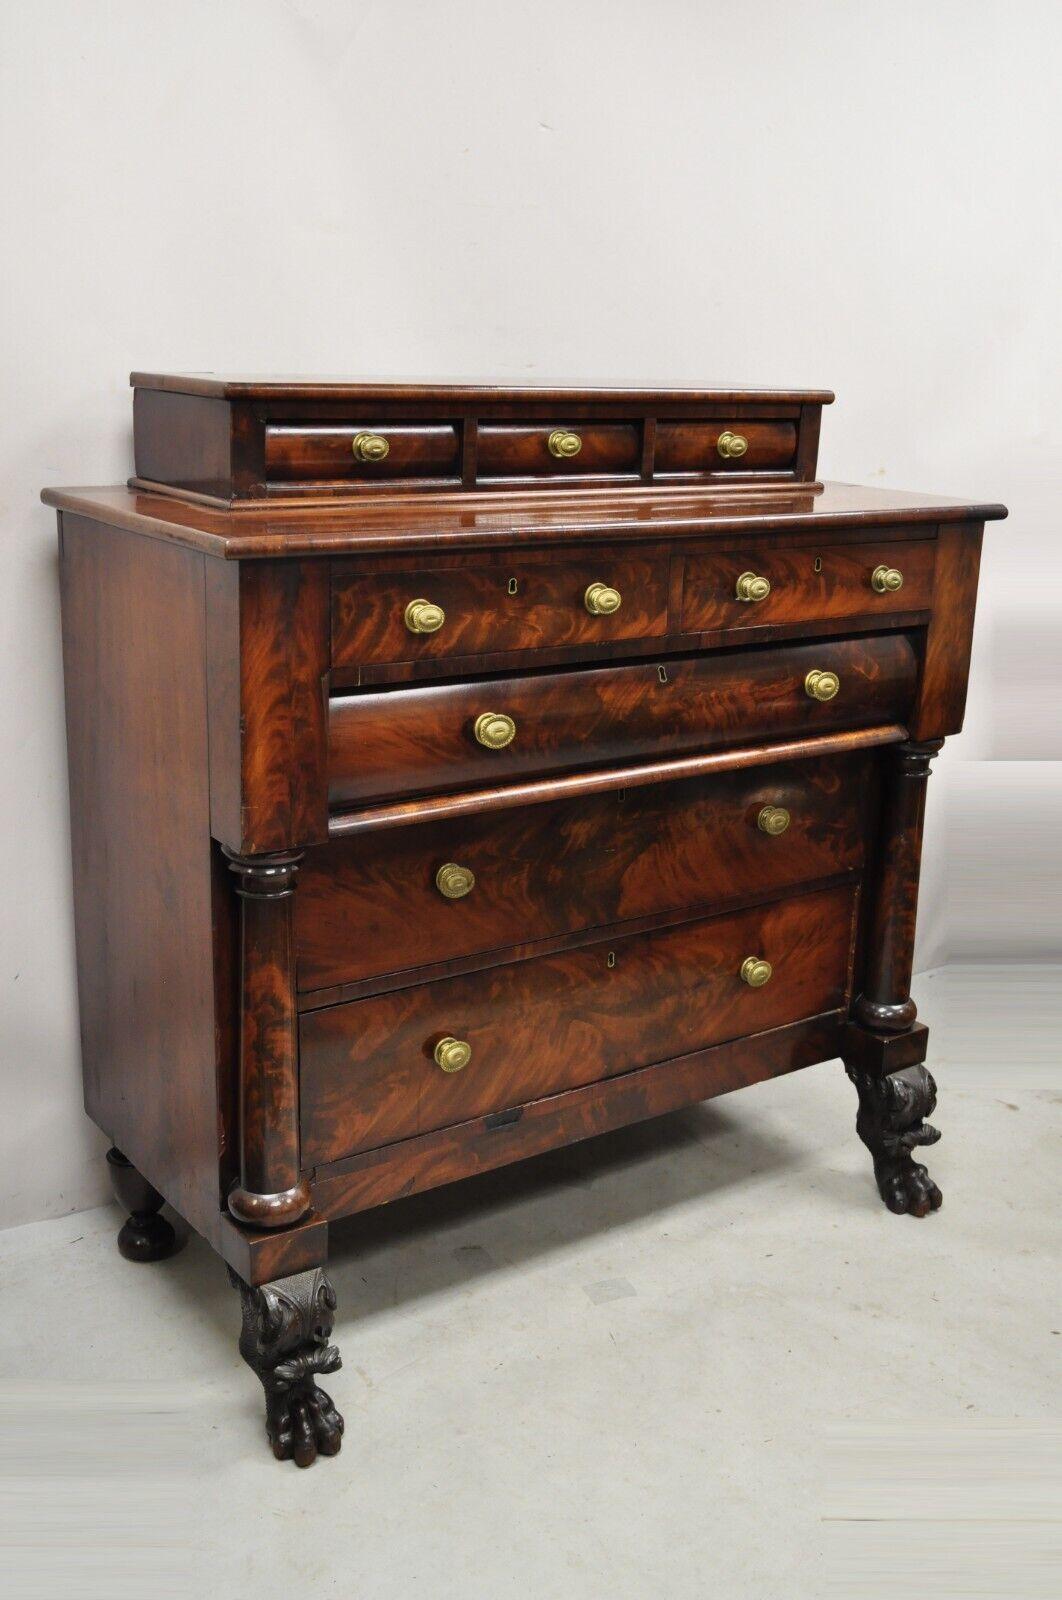 Antique American Empire Crotch Mahogany Chest Drawers Step Back Dresser with Paw Feet. Item features column supports, lift off upper small 3 drawer section, beautiful wood grain, no key but unlocked, 8 dovetailed drawers, carved paw feet, solid